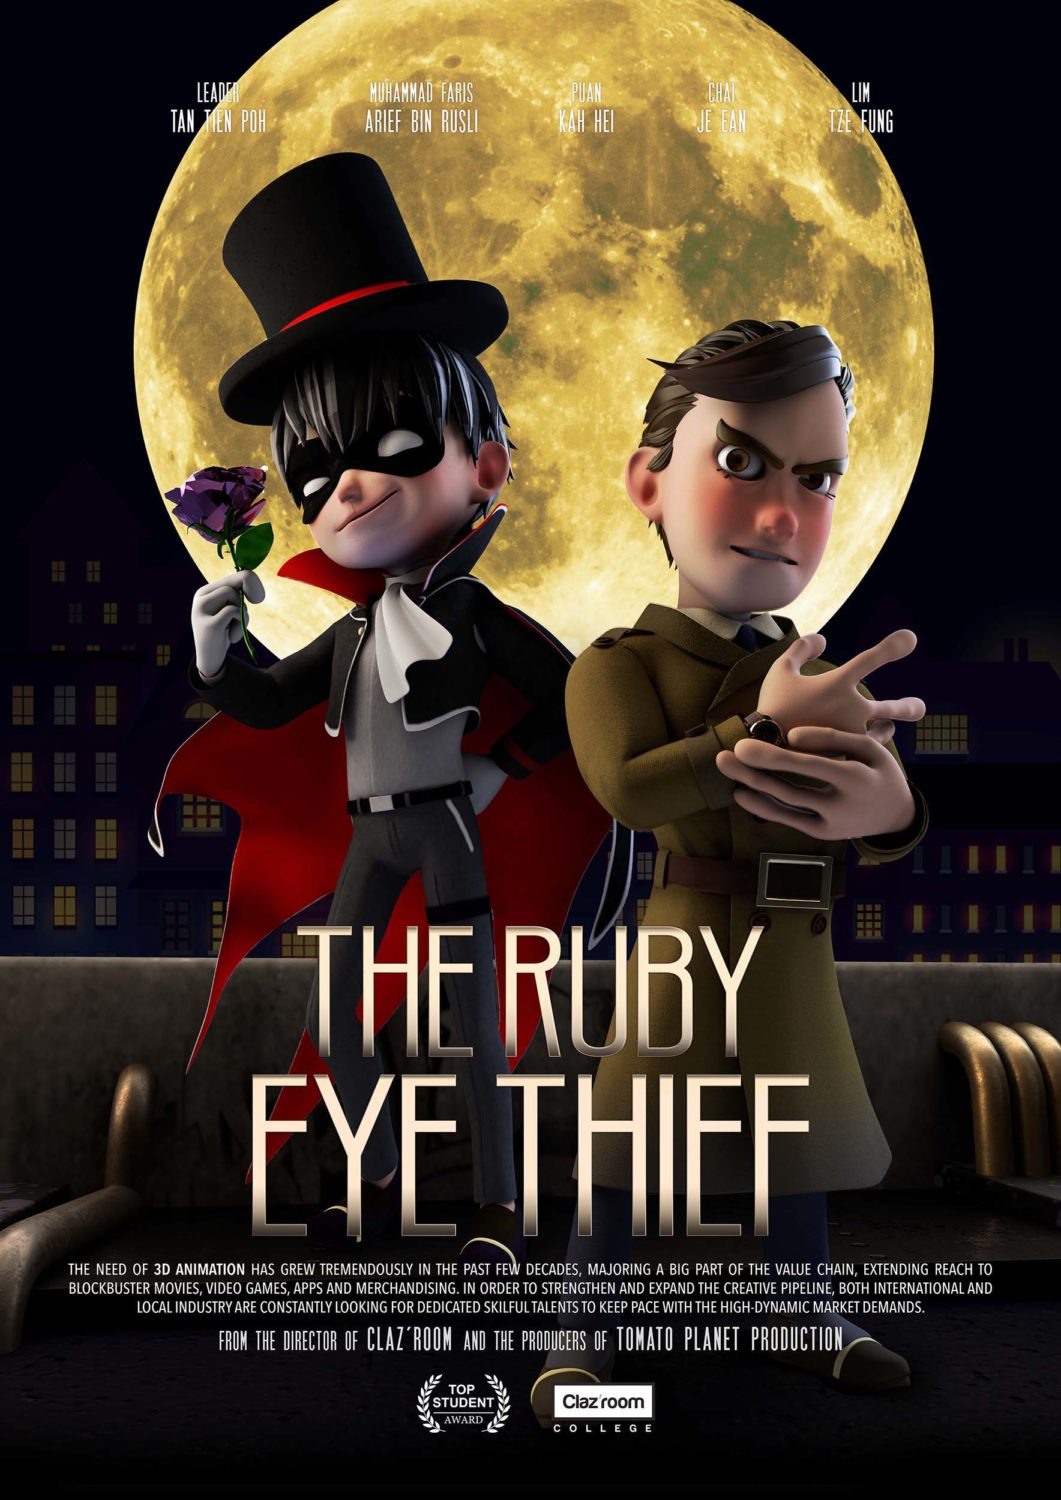 3D Animation Project theme "The ruby eye thief", both antagonistic men stand opposite under the moon